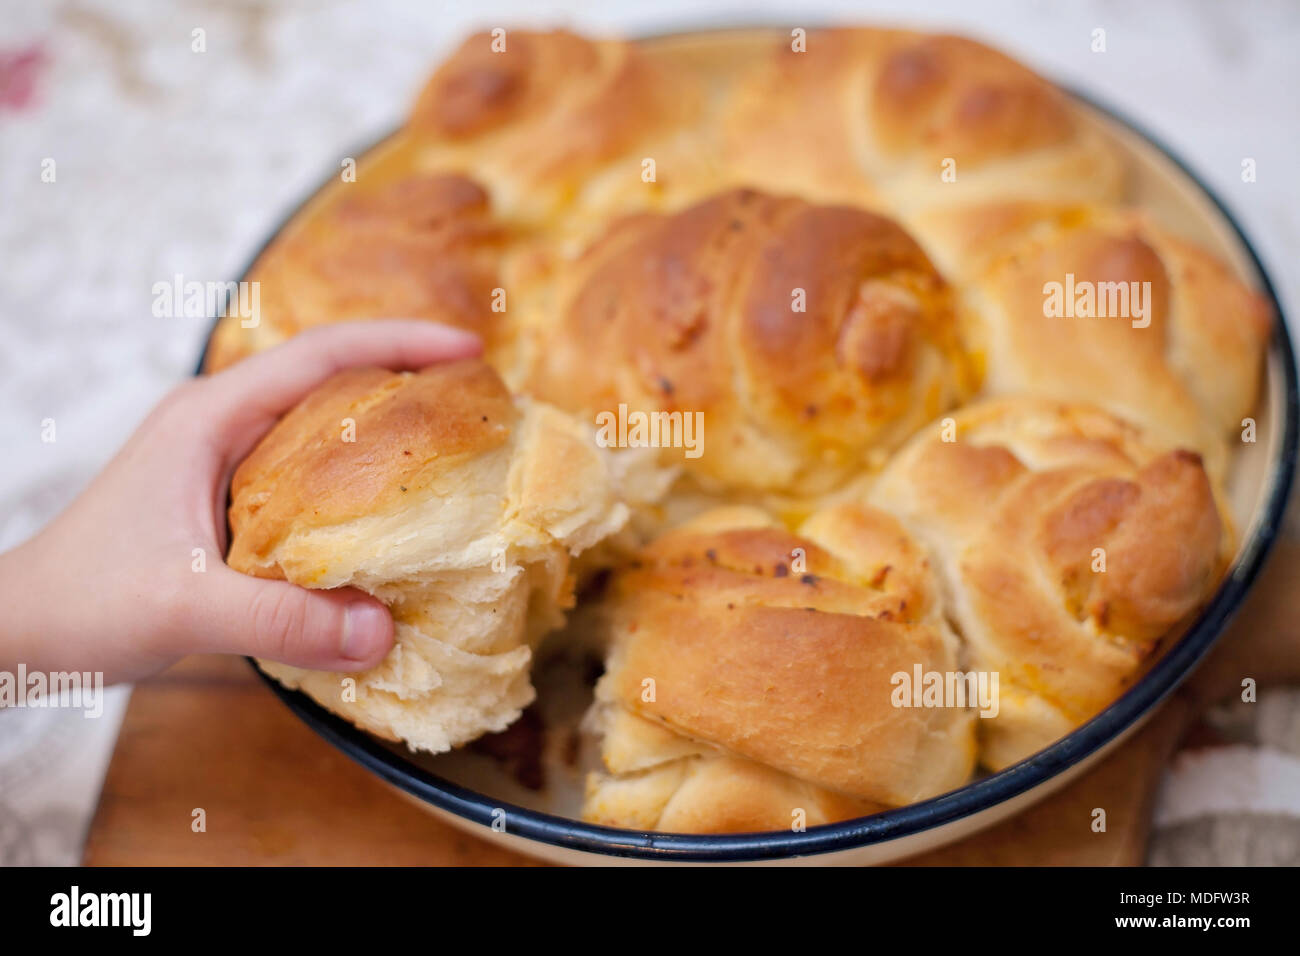 Boy's hand reaching for a piece of Bulgarian homemade bread Stock Photo